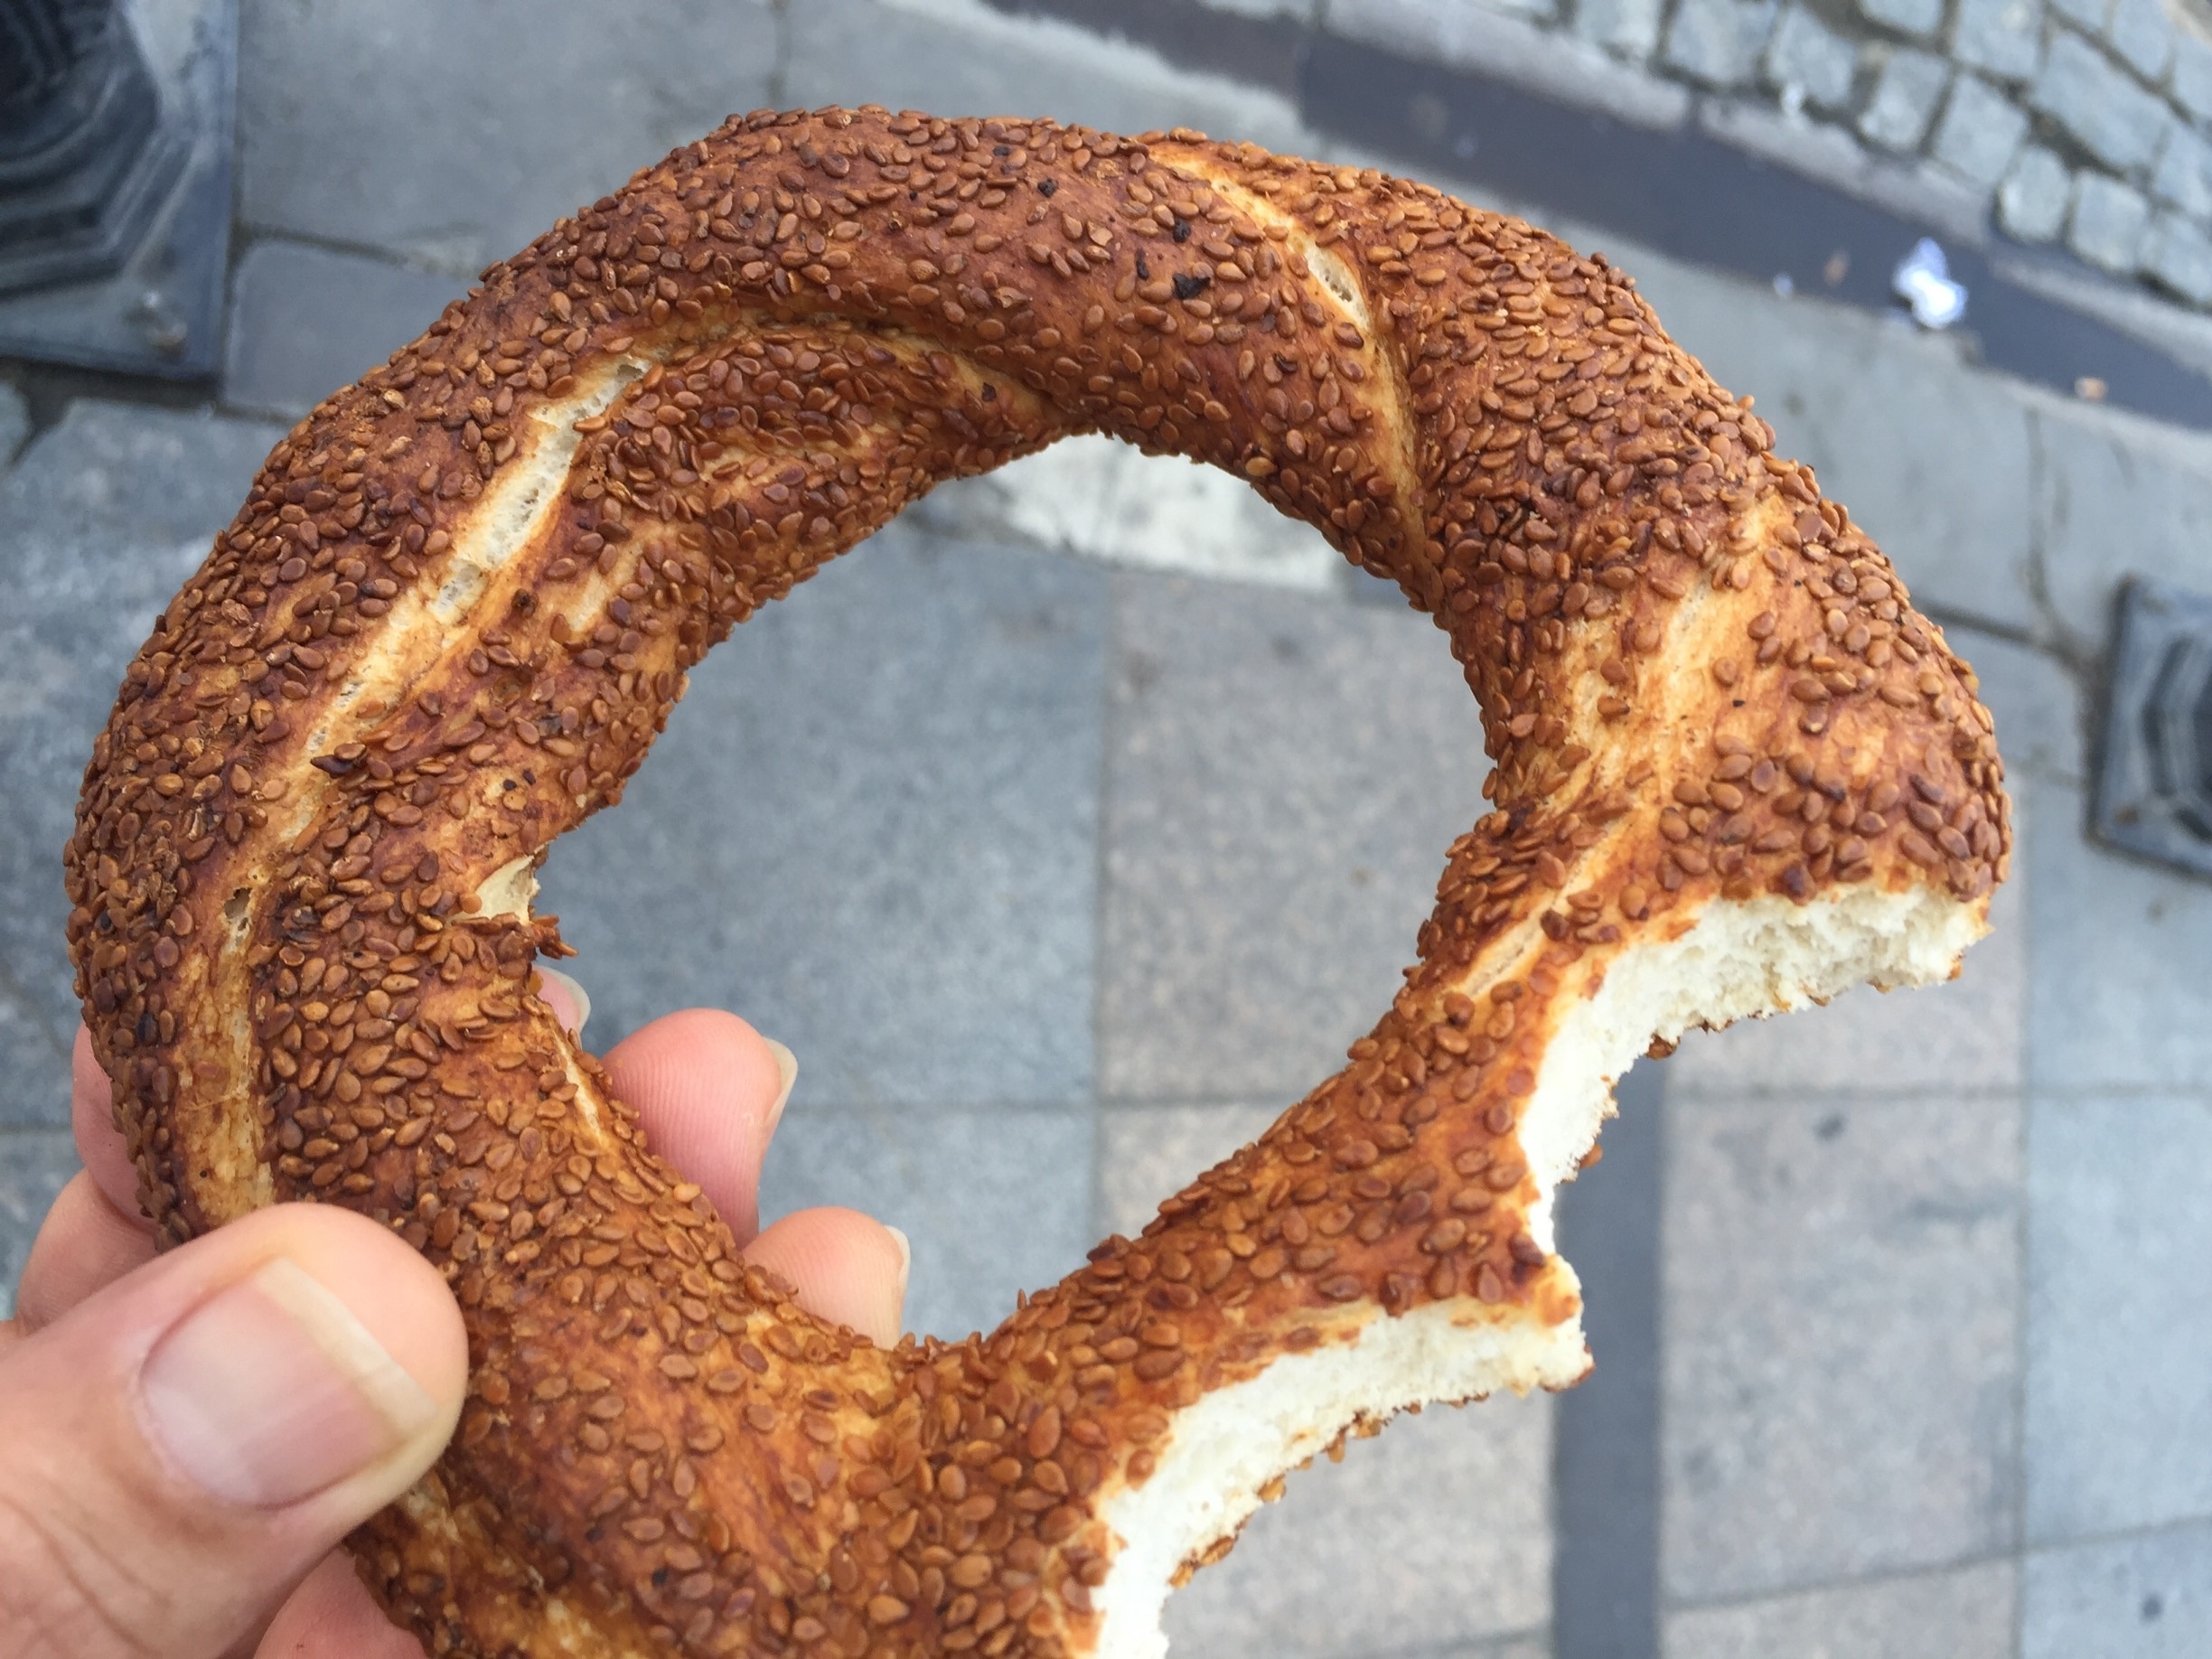 I eat 10 of these a day every time I come to #Istanbul. Soft chewy and delicious #Simit 😍